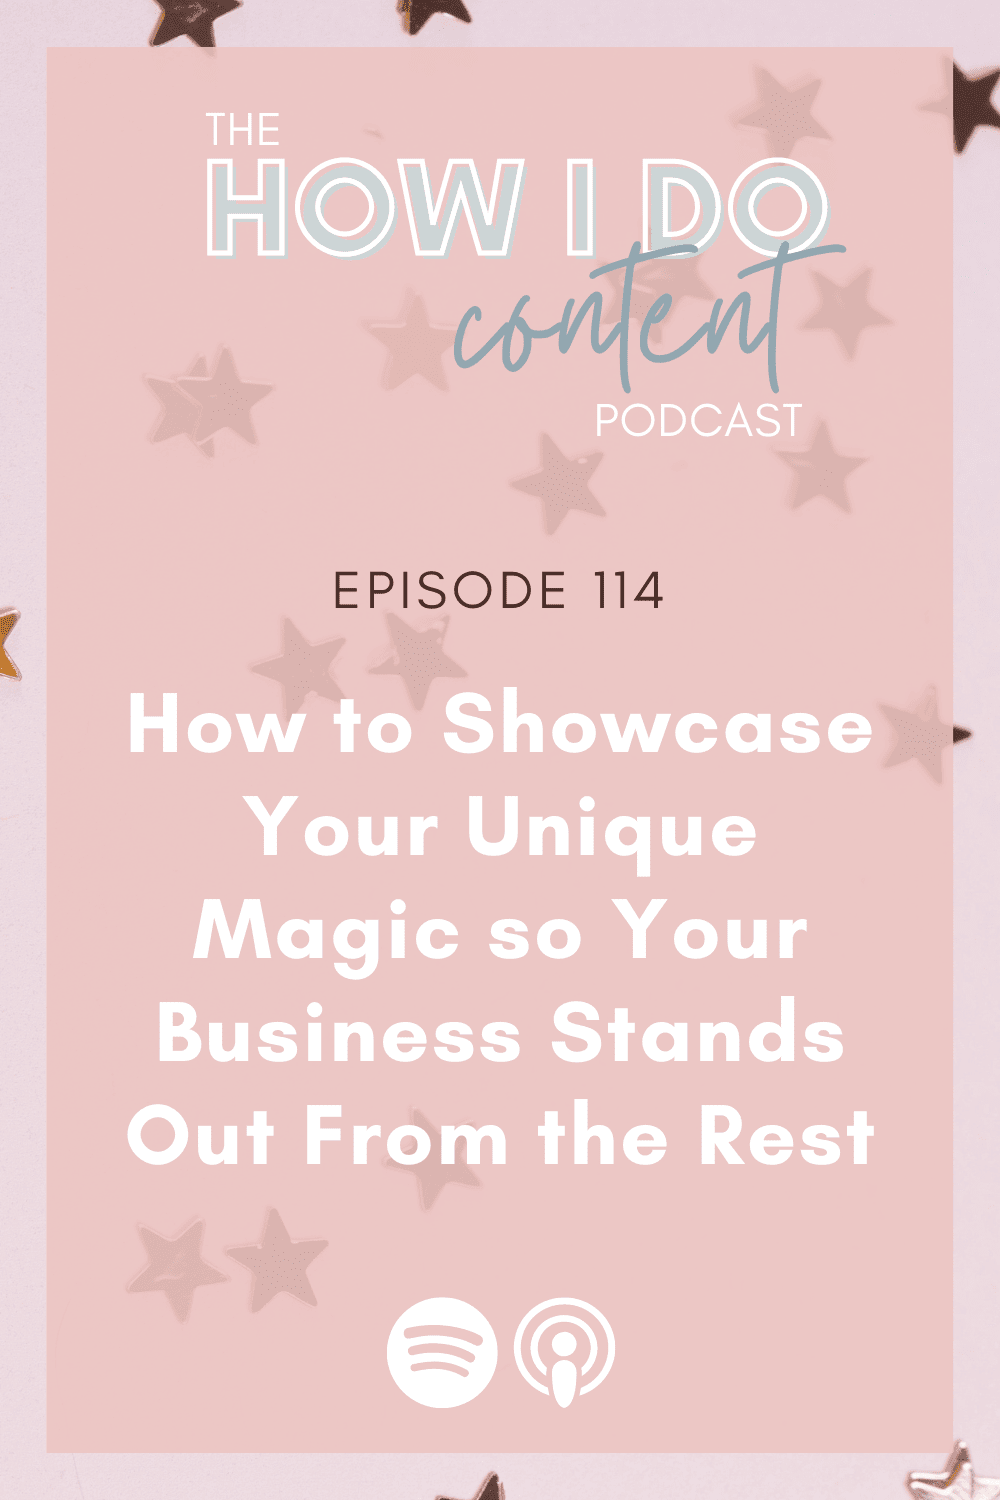 How to Showcase Your Unique Magic so Your Business Stands Out From the Rest